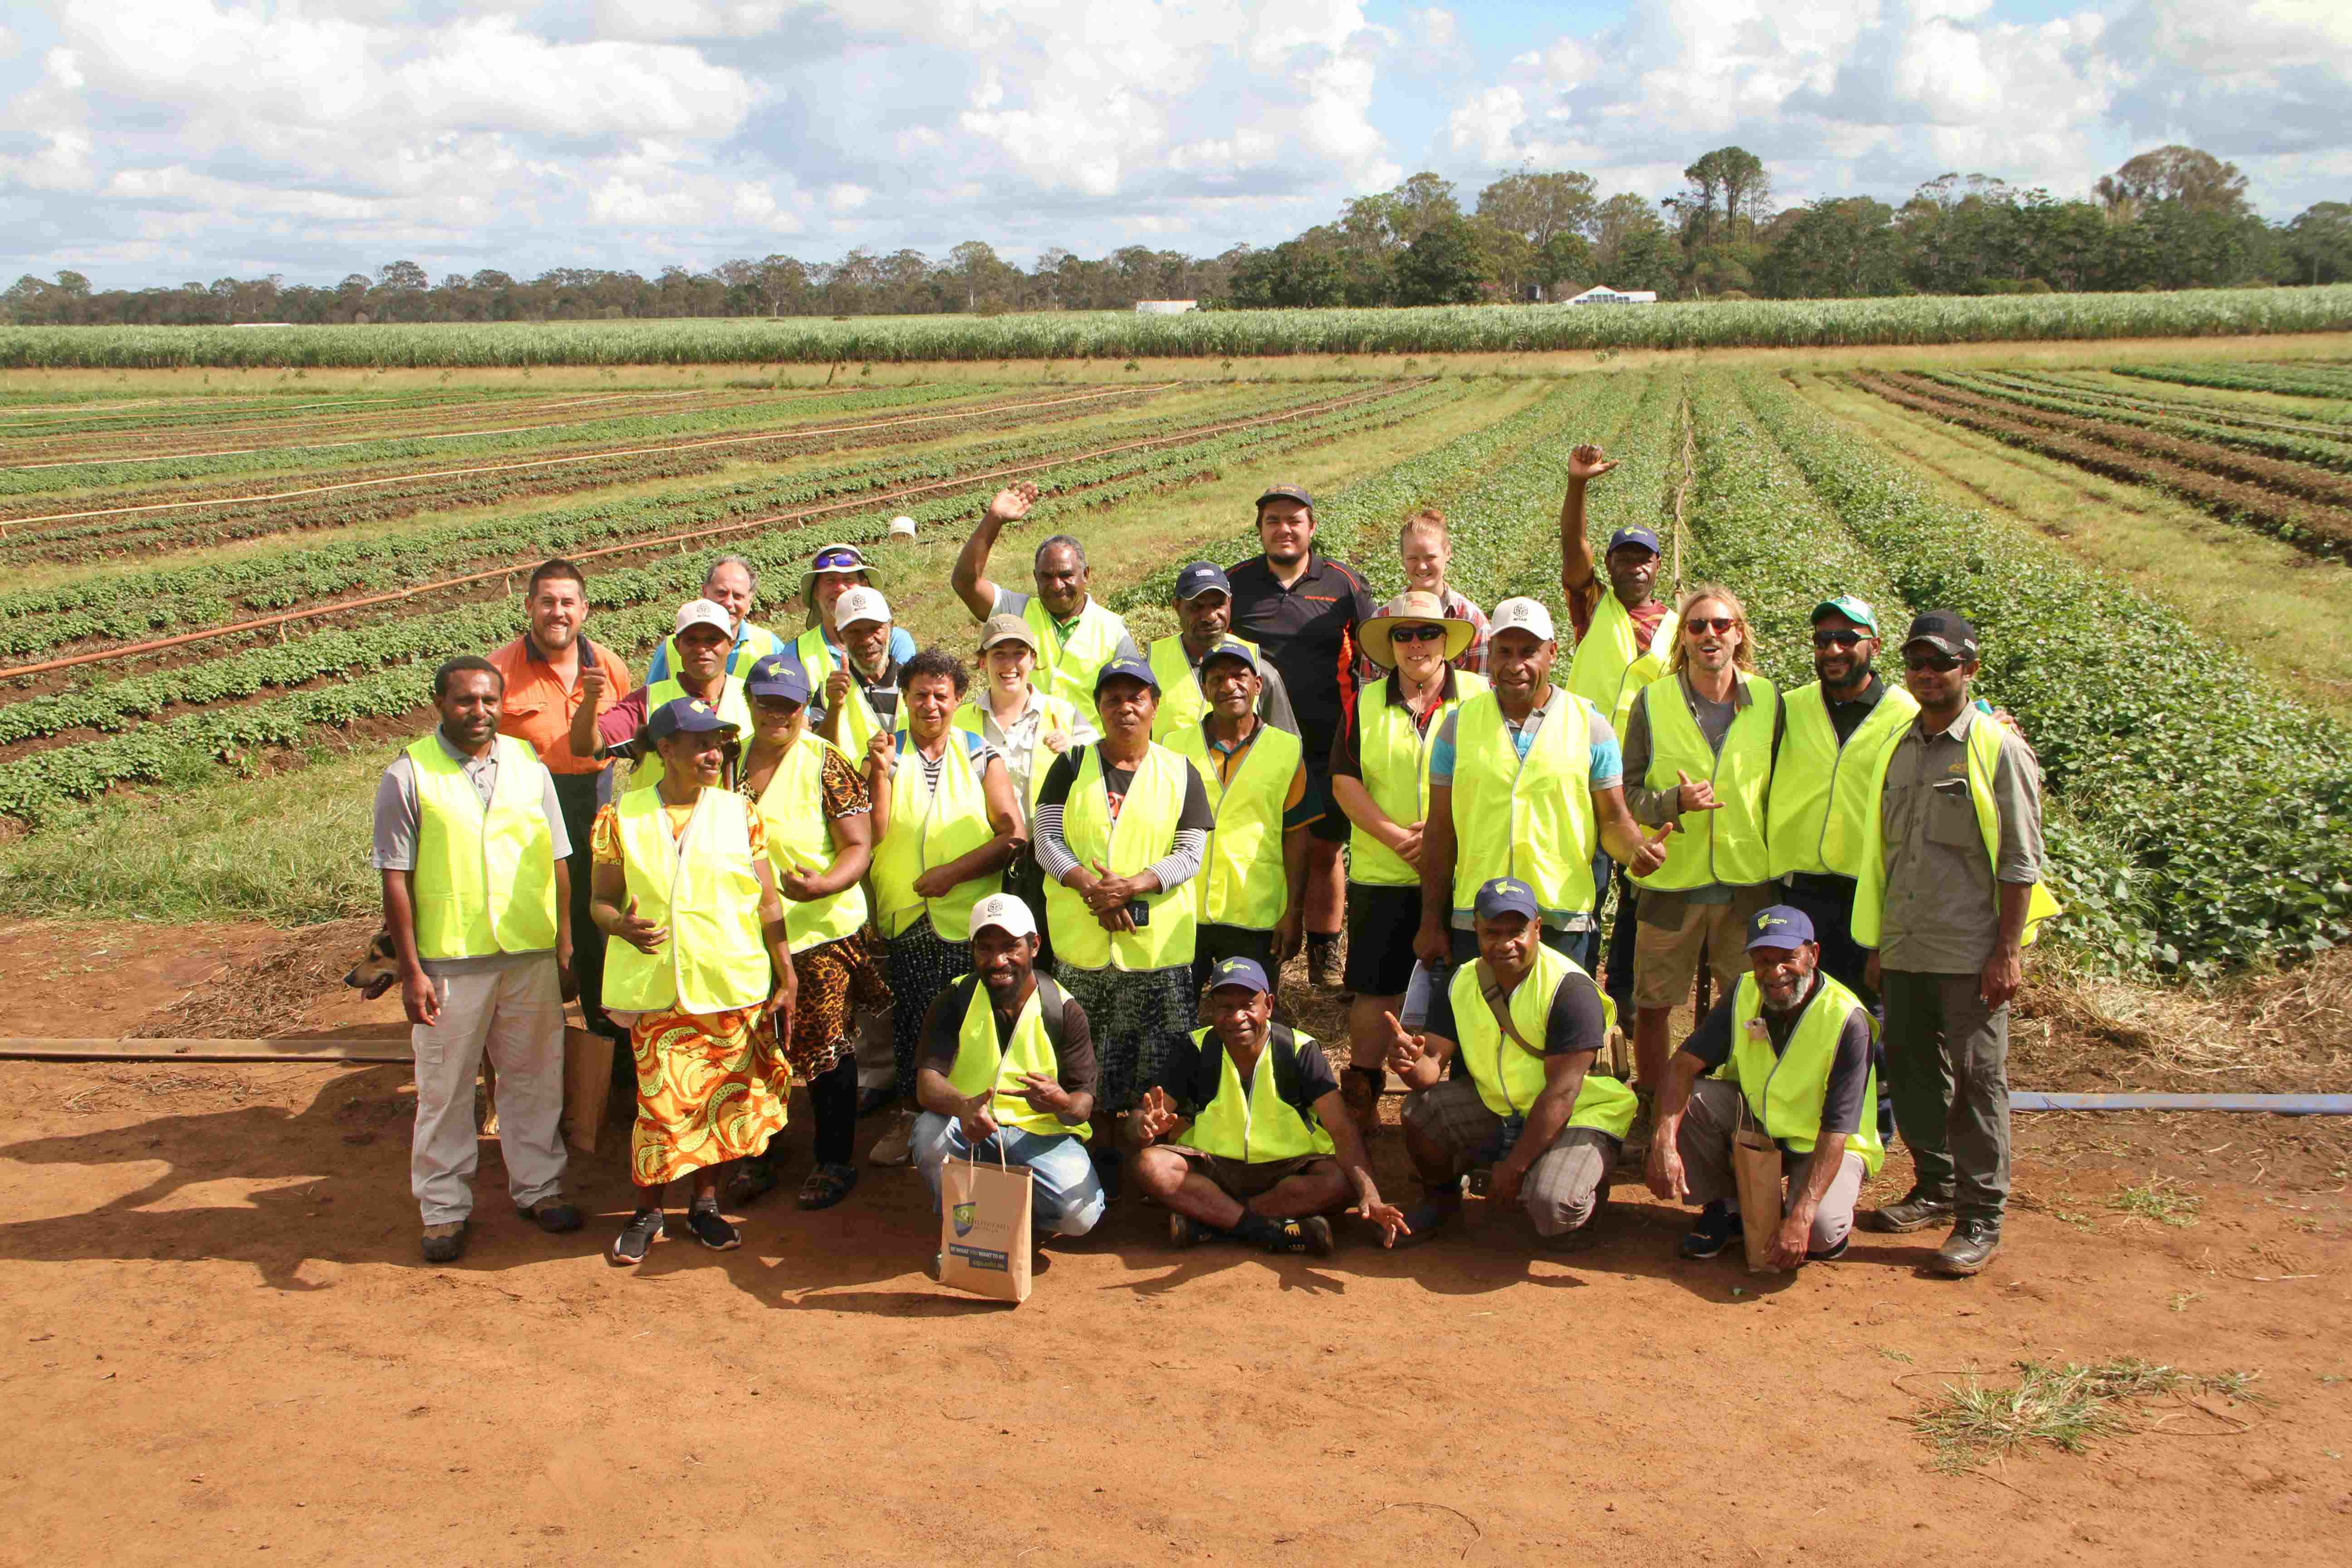 A group of 24 people gathered together at the end of a field with rows of sweetpotato growing behind them. 